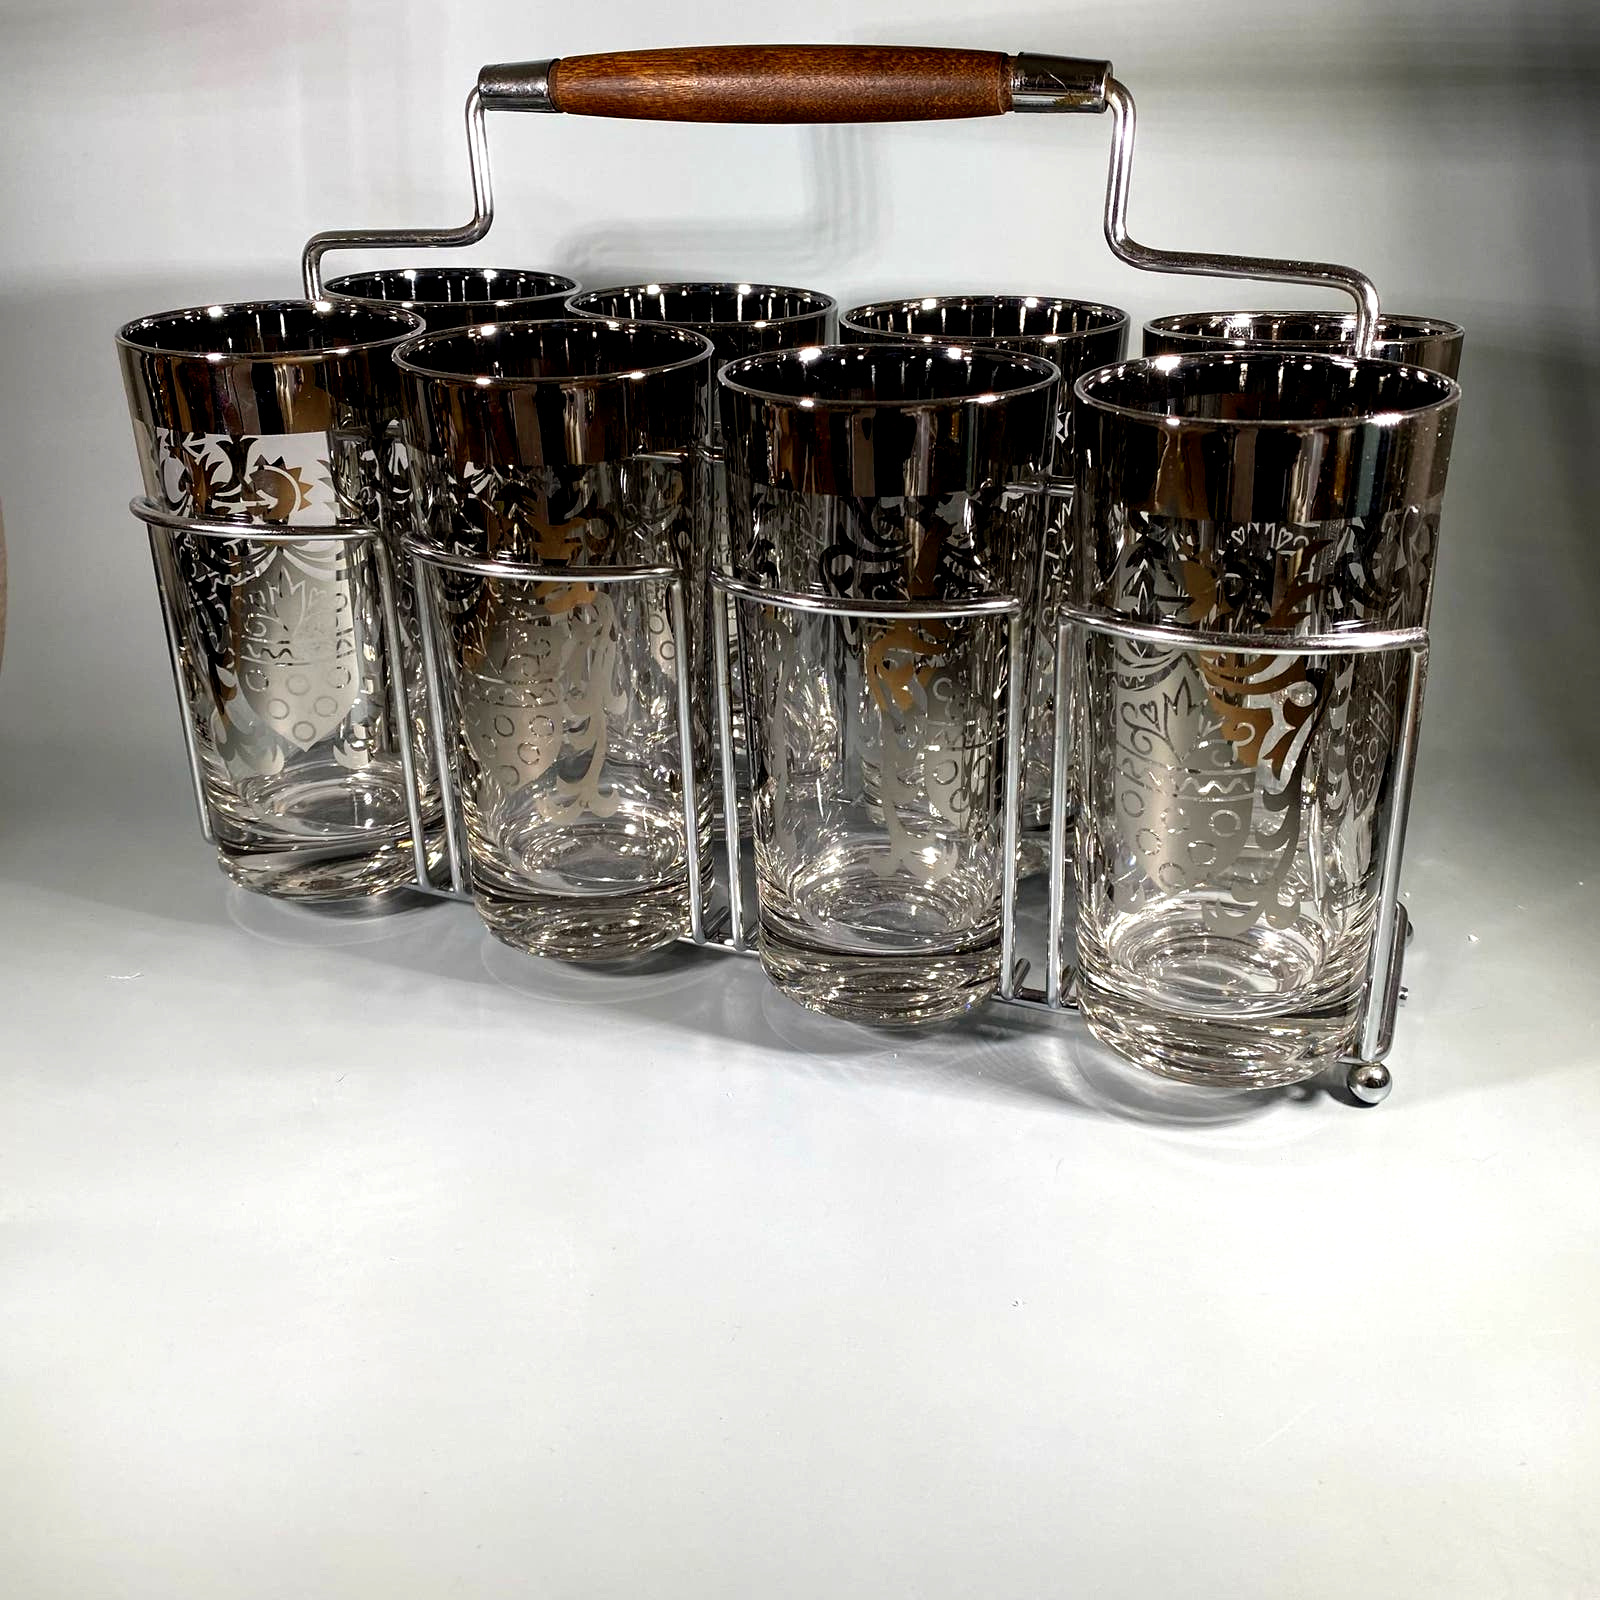 Kimiko Knight Highball Vintage Glass Tumbler Set with Caddy